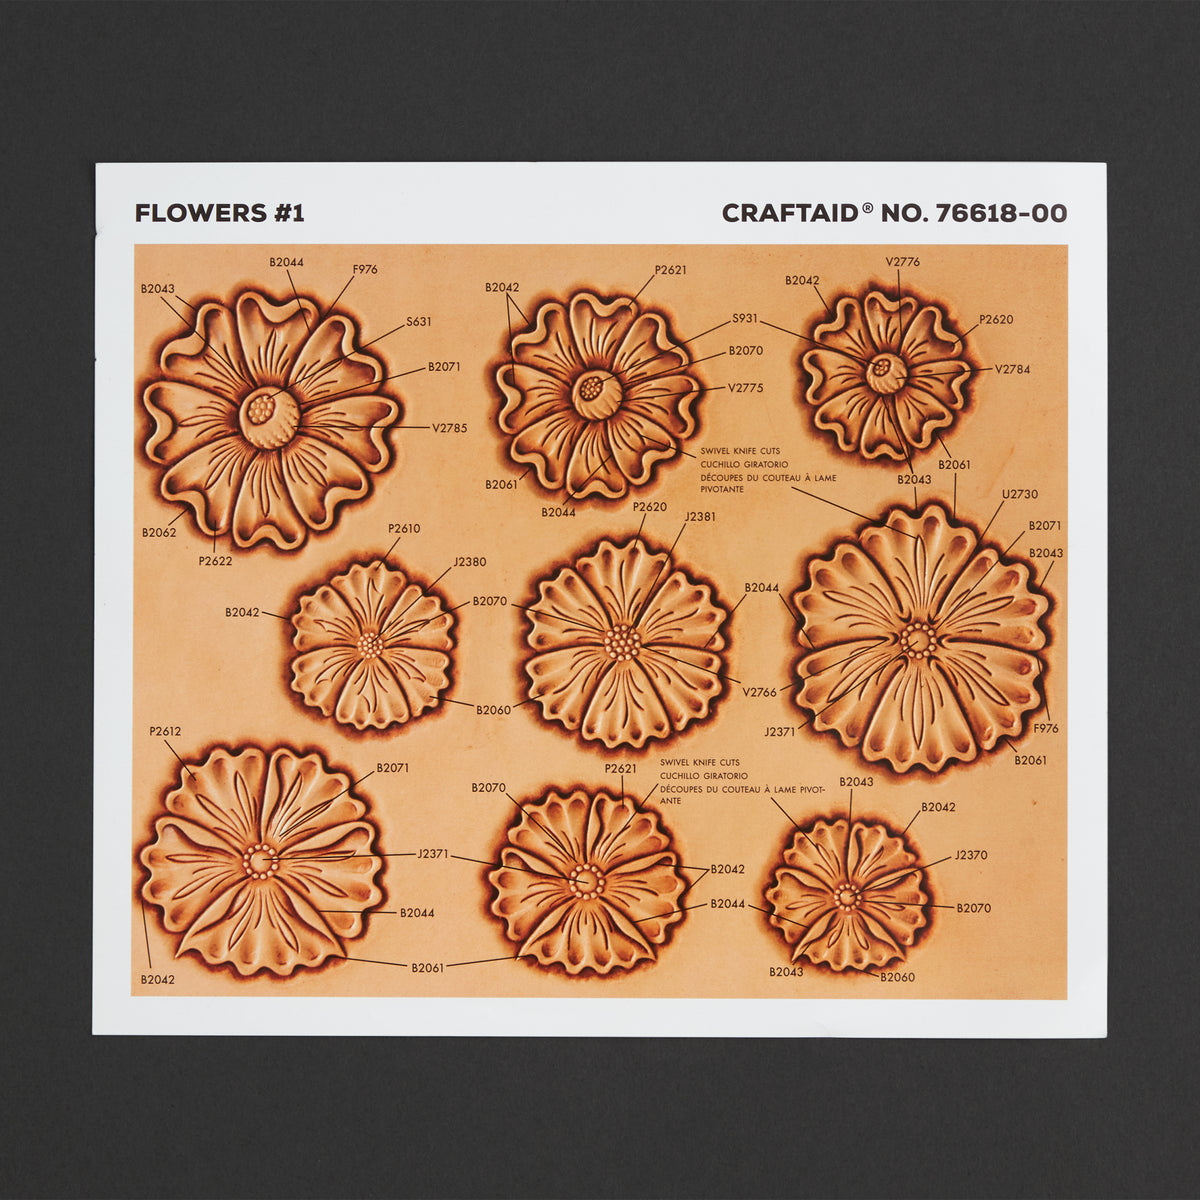 Tandy Leather Flowers #1 Craftaid 76618-00